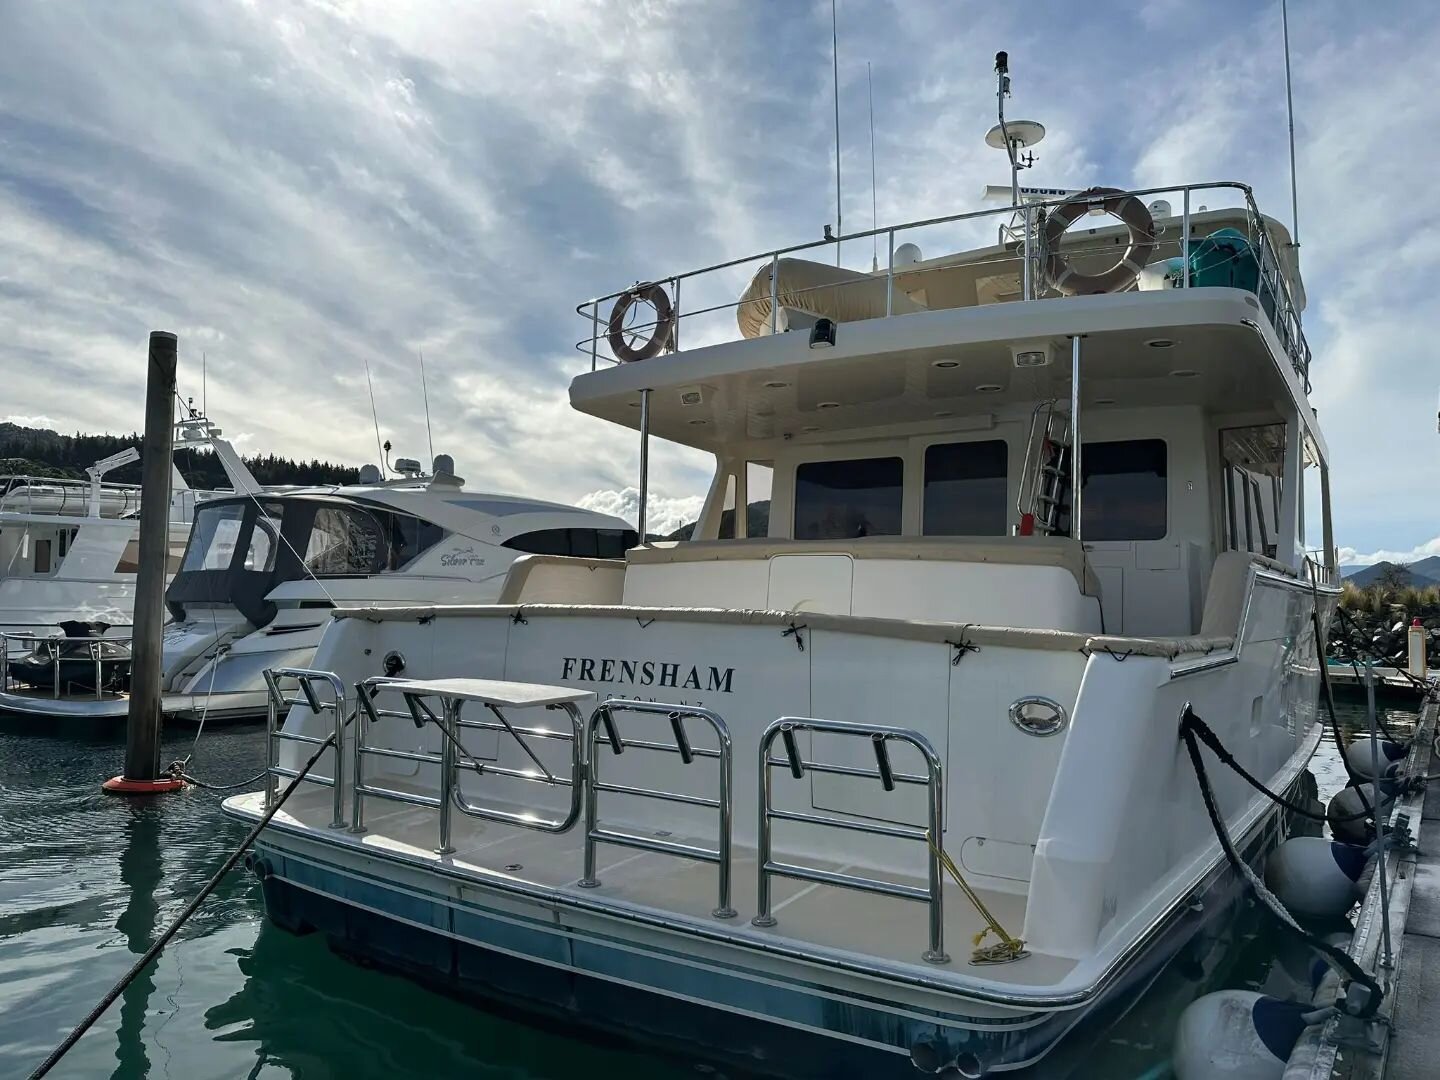 Some of the great benefits of having your boat professionally cleaned, whether it's once a week, fortnightly or once a month by @wilax.detailing

Our service:
&bull; Improves Boat Aesthetics: Regularly detailing your boat will improve the overall aes